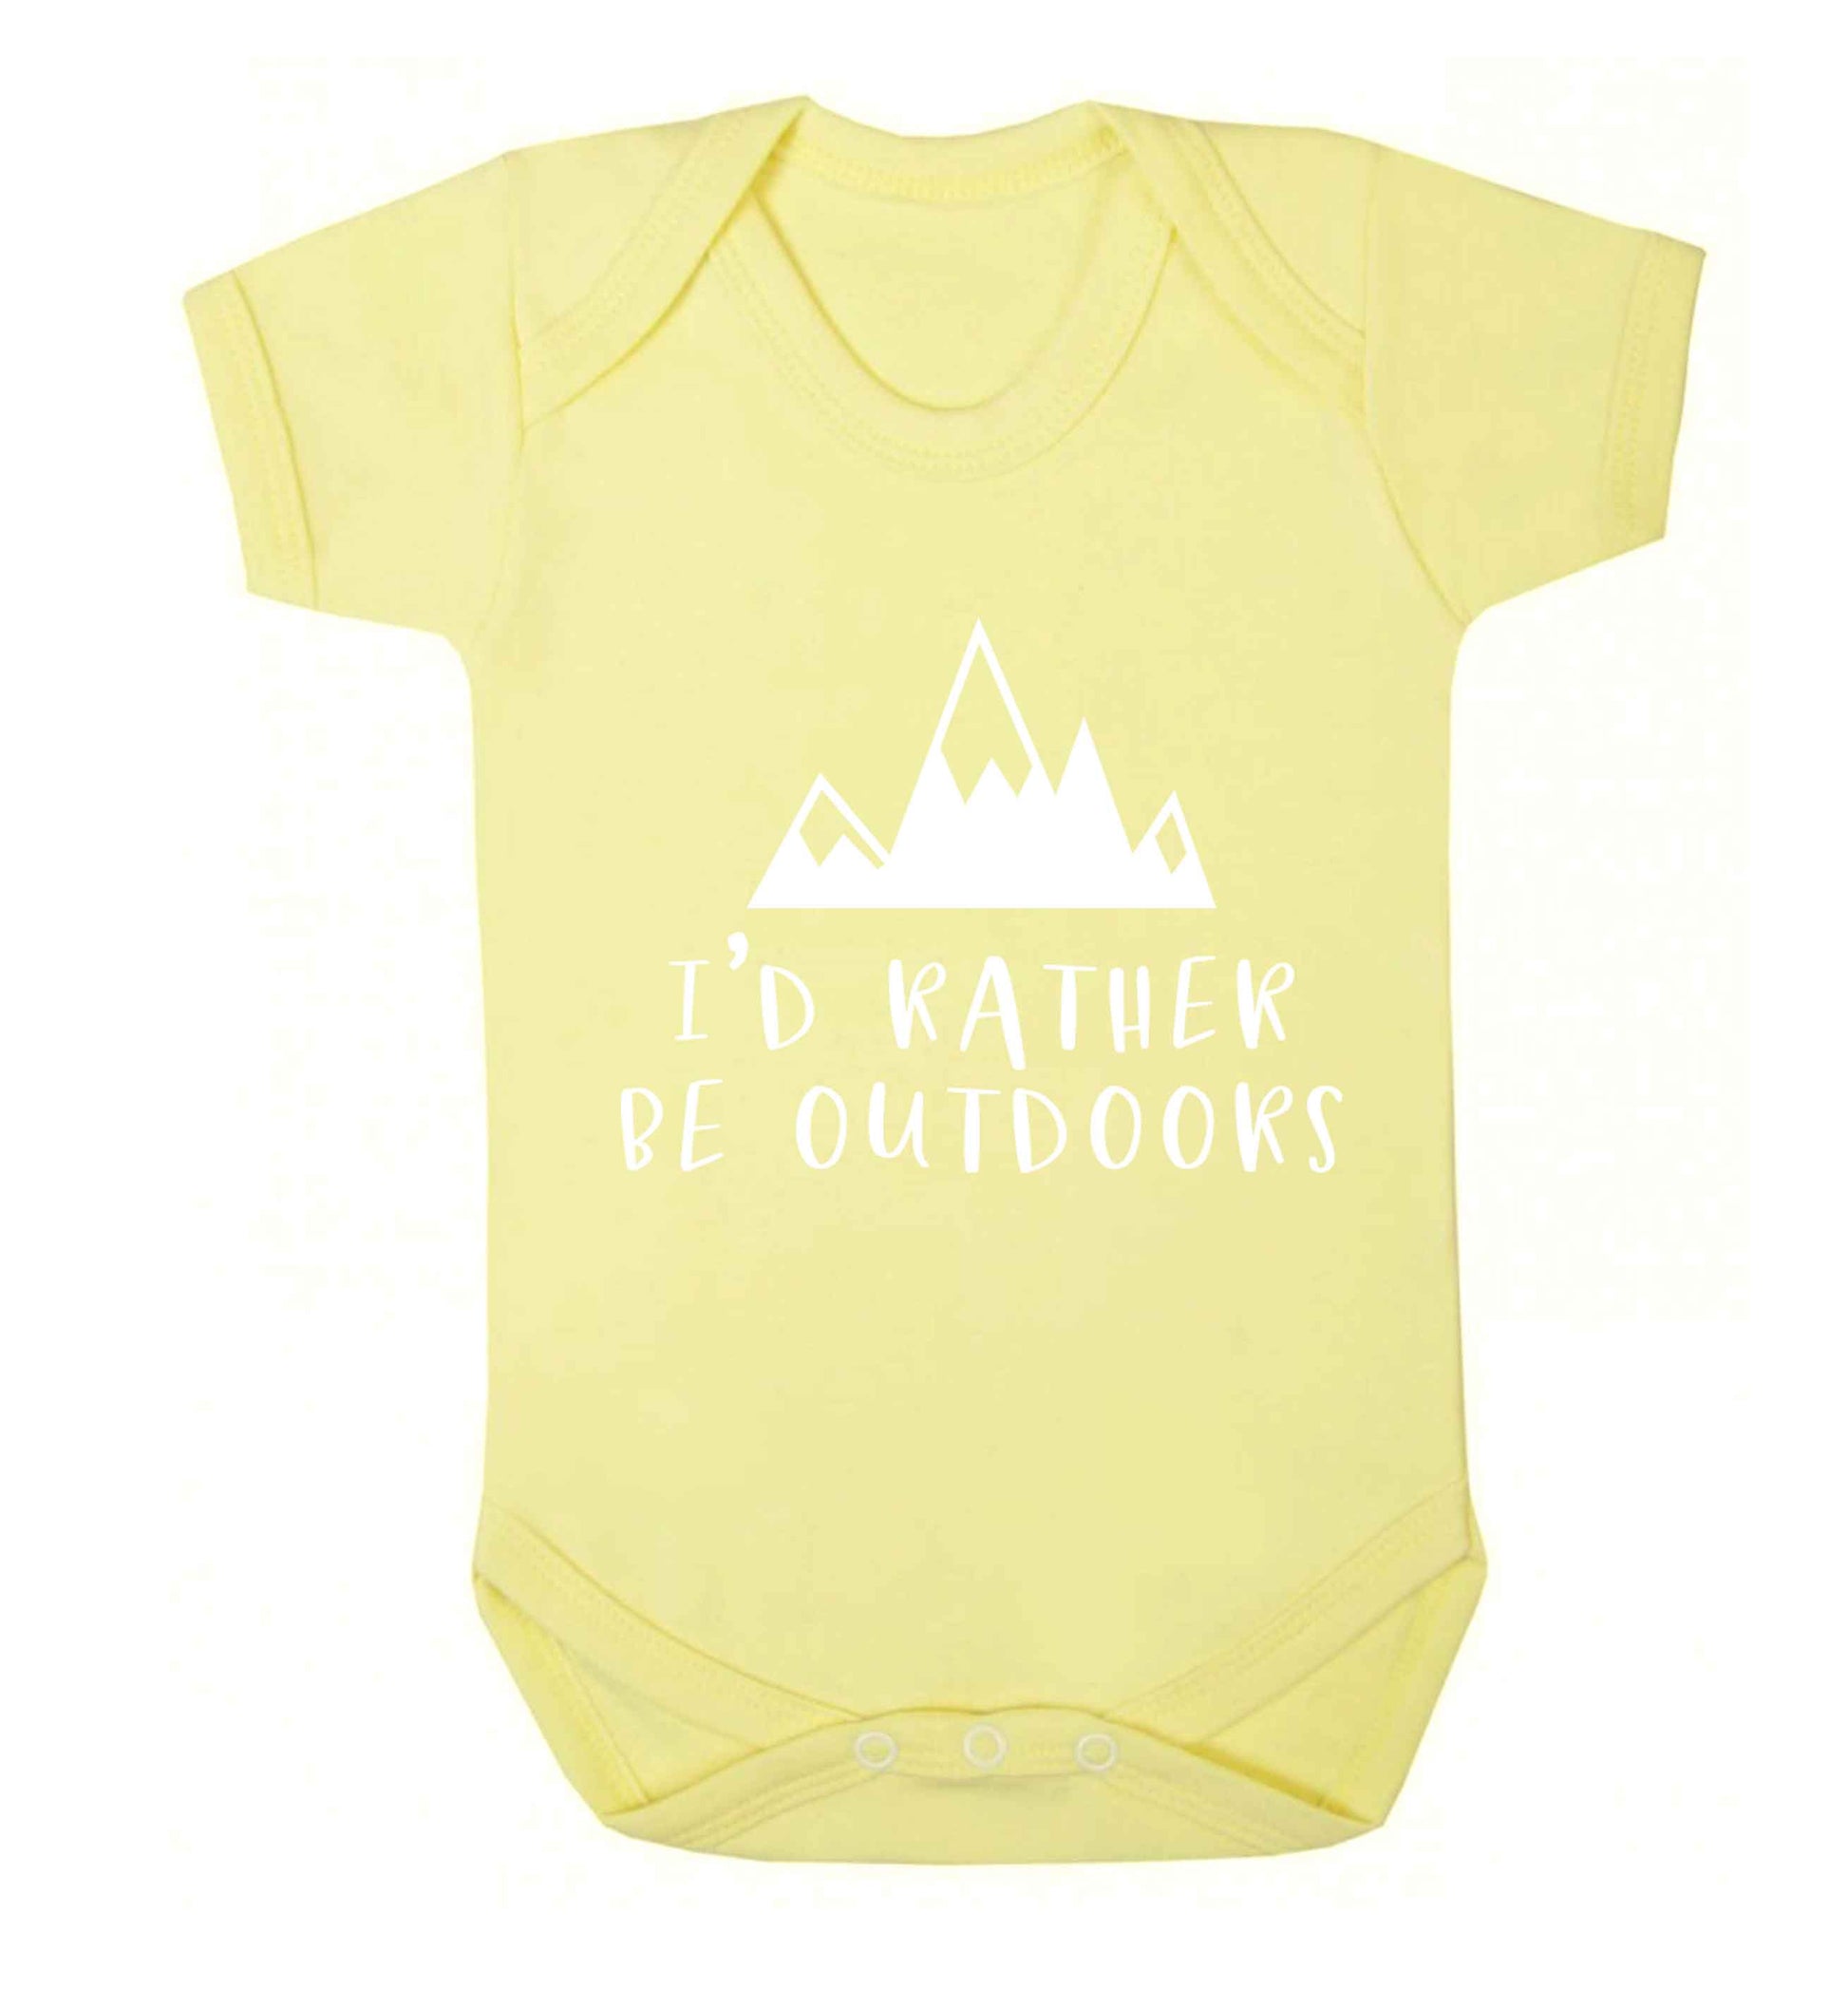 I'd rather be outdoors Baby Vest pale yellow 18-24 months